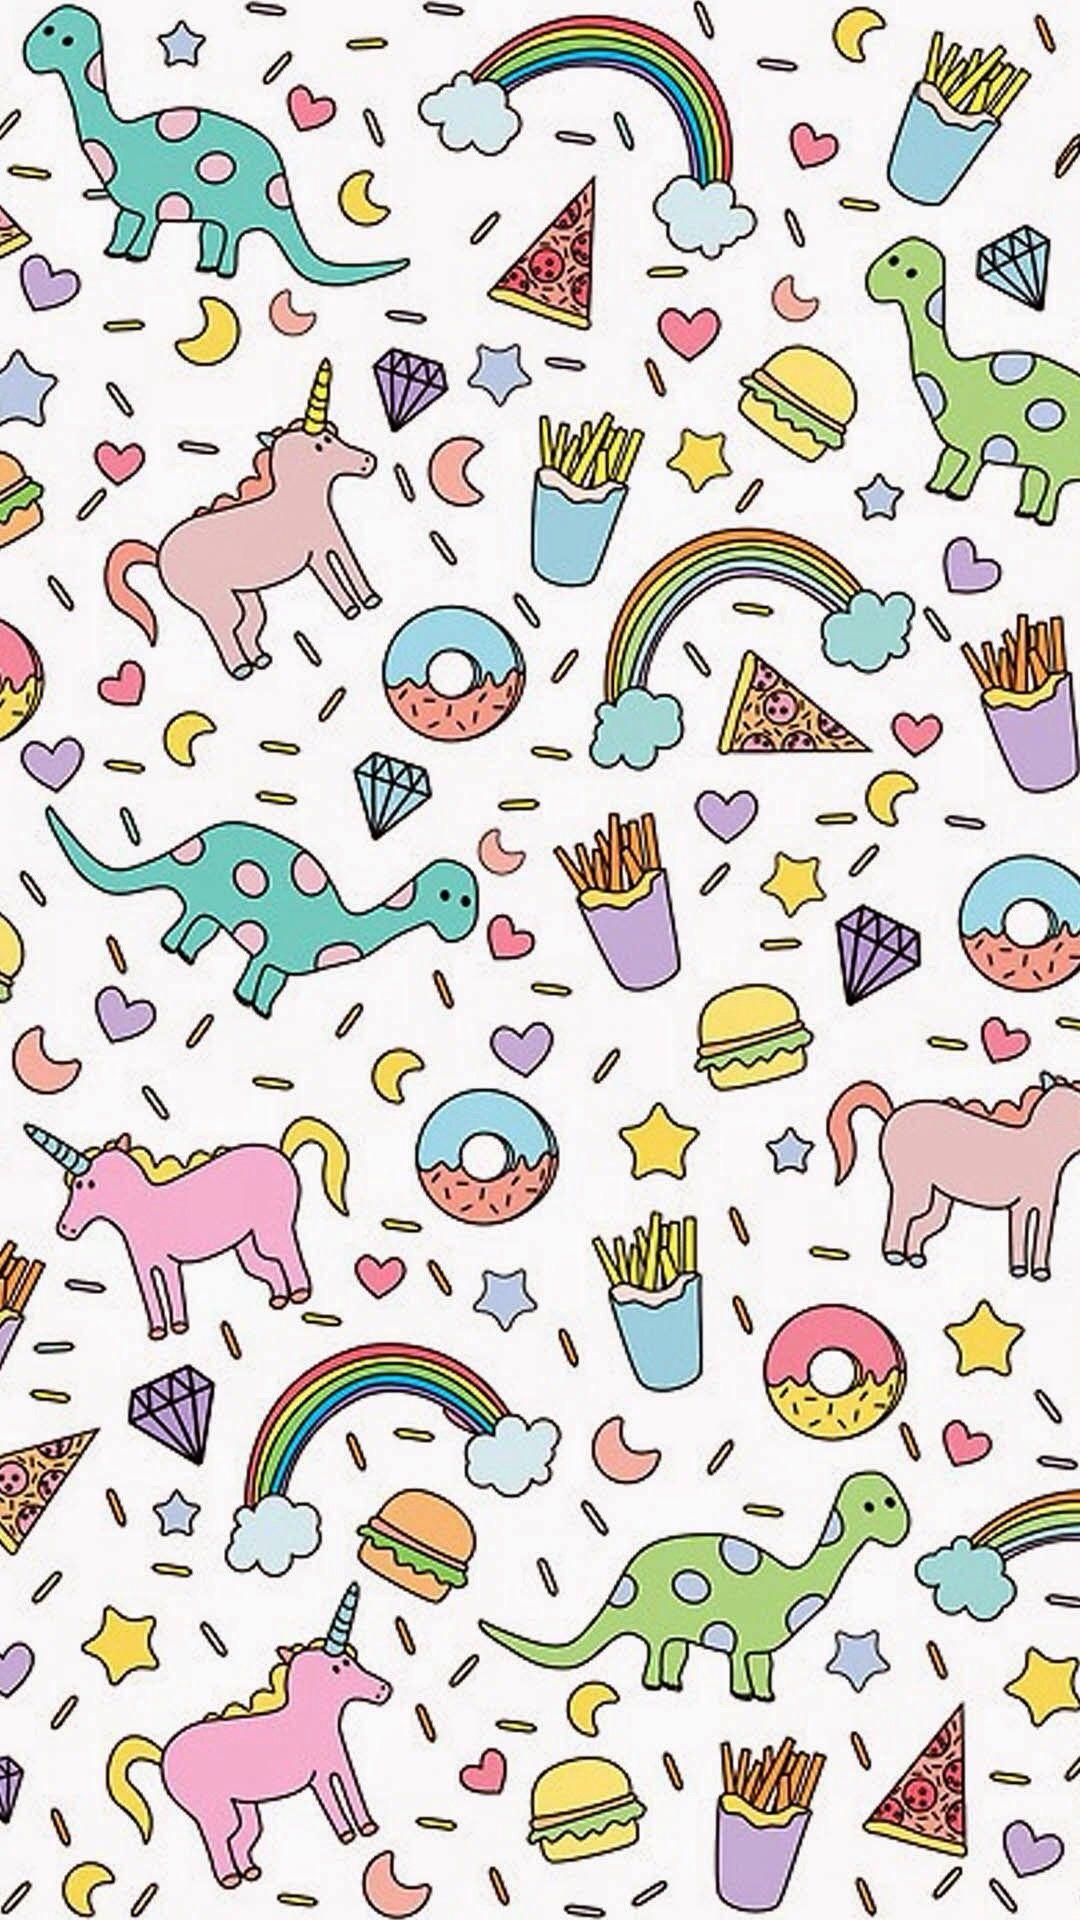 Unicorns, dinosaurs, donuts, burgers, and fries pattern. Cute